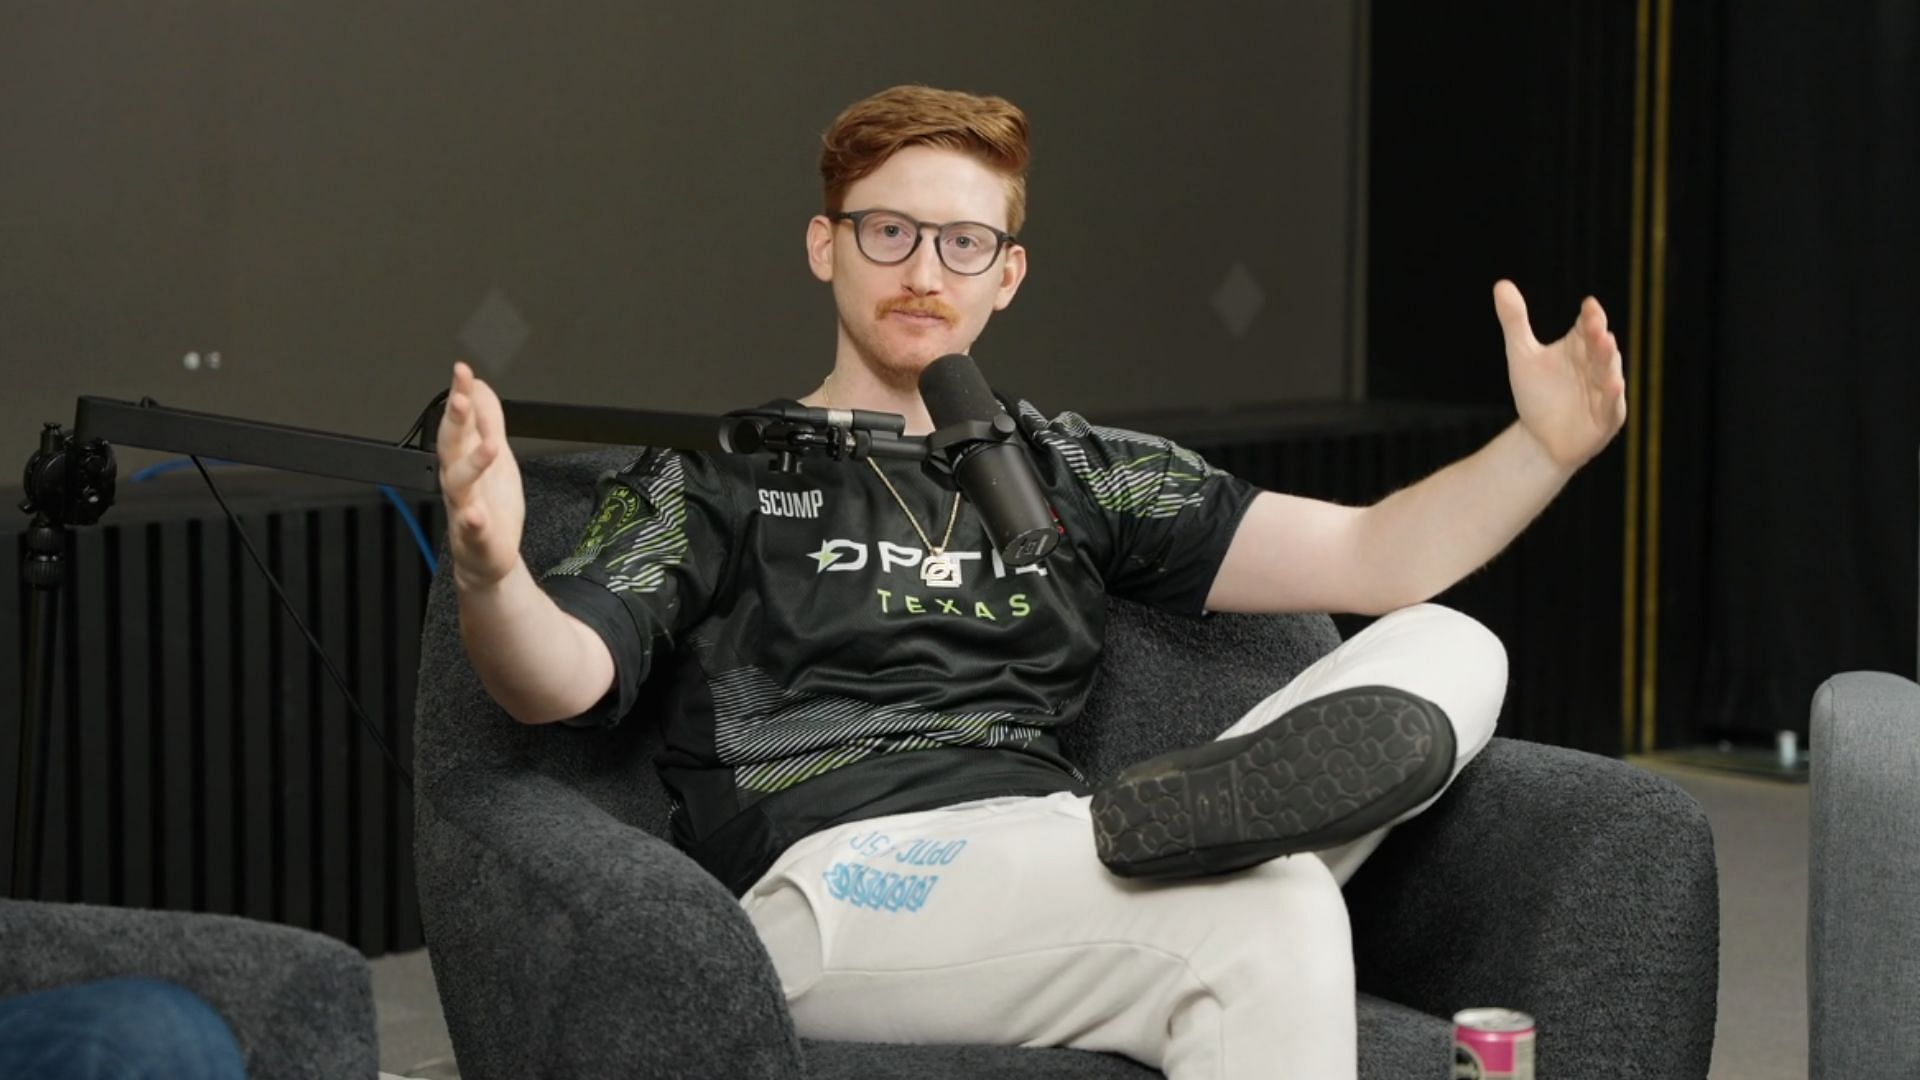 Scump crosses the 90,000 viewers mark on Twitch during the CDL watch party